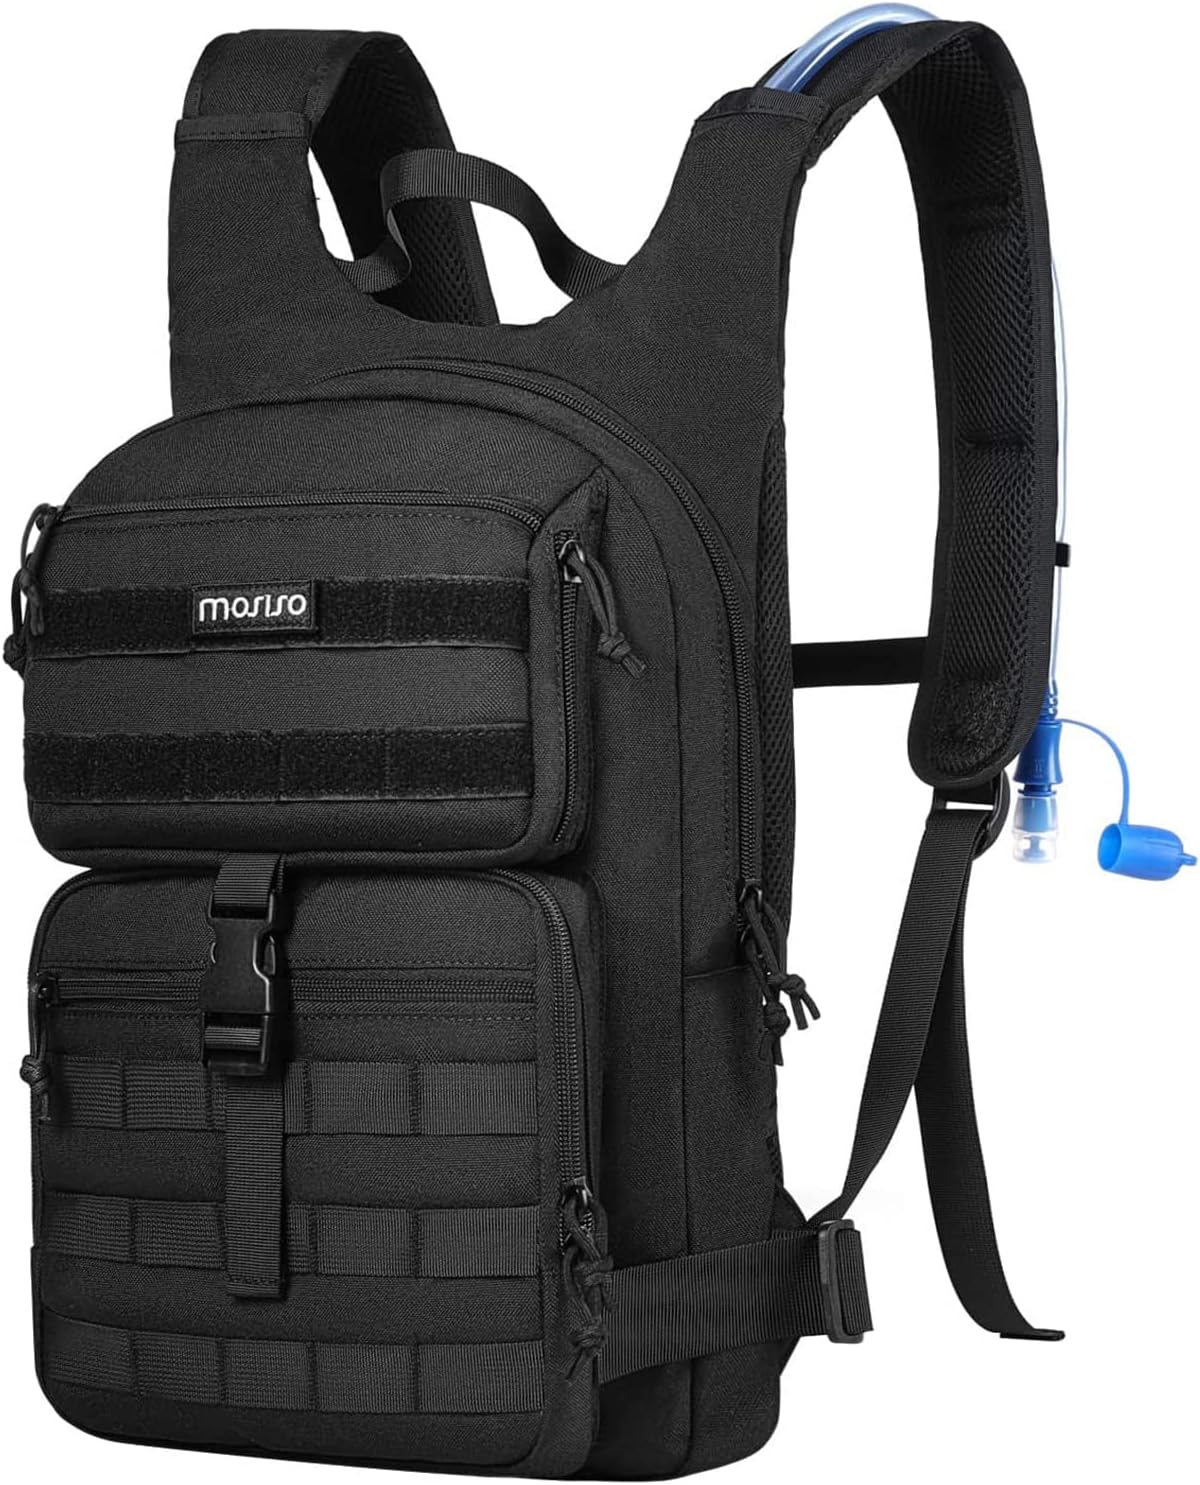 MOSISO Tactical Hydration Pack Backpack review